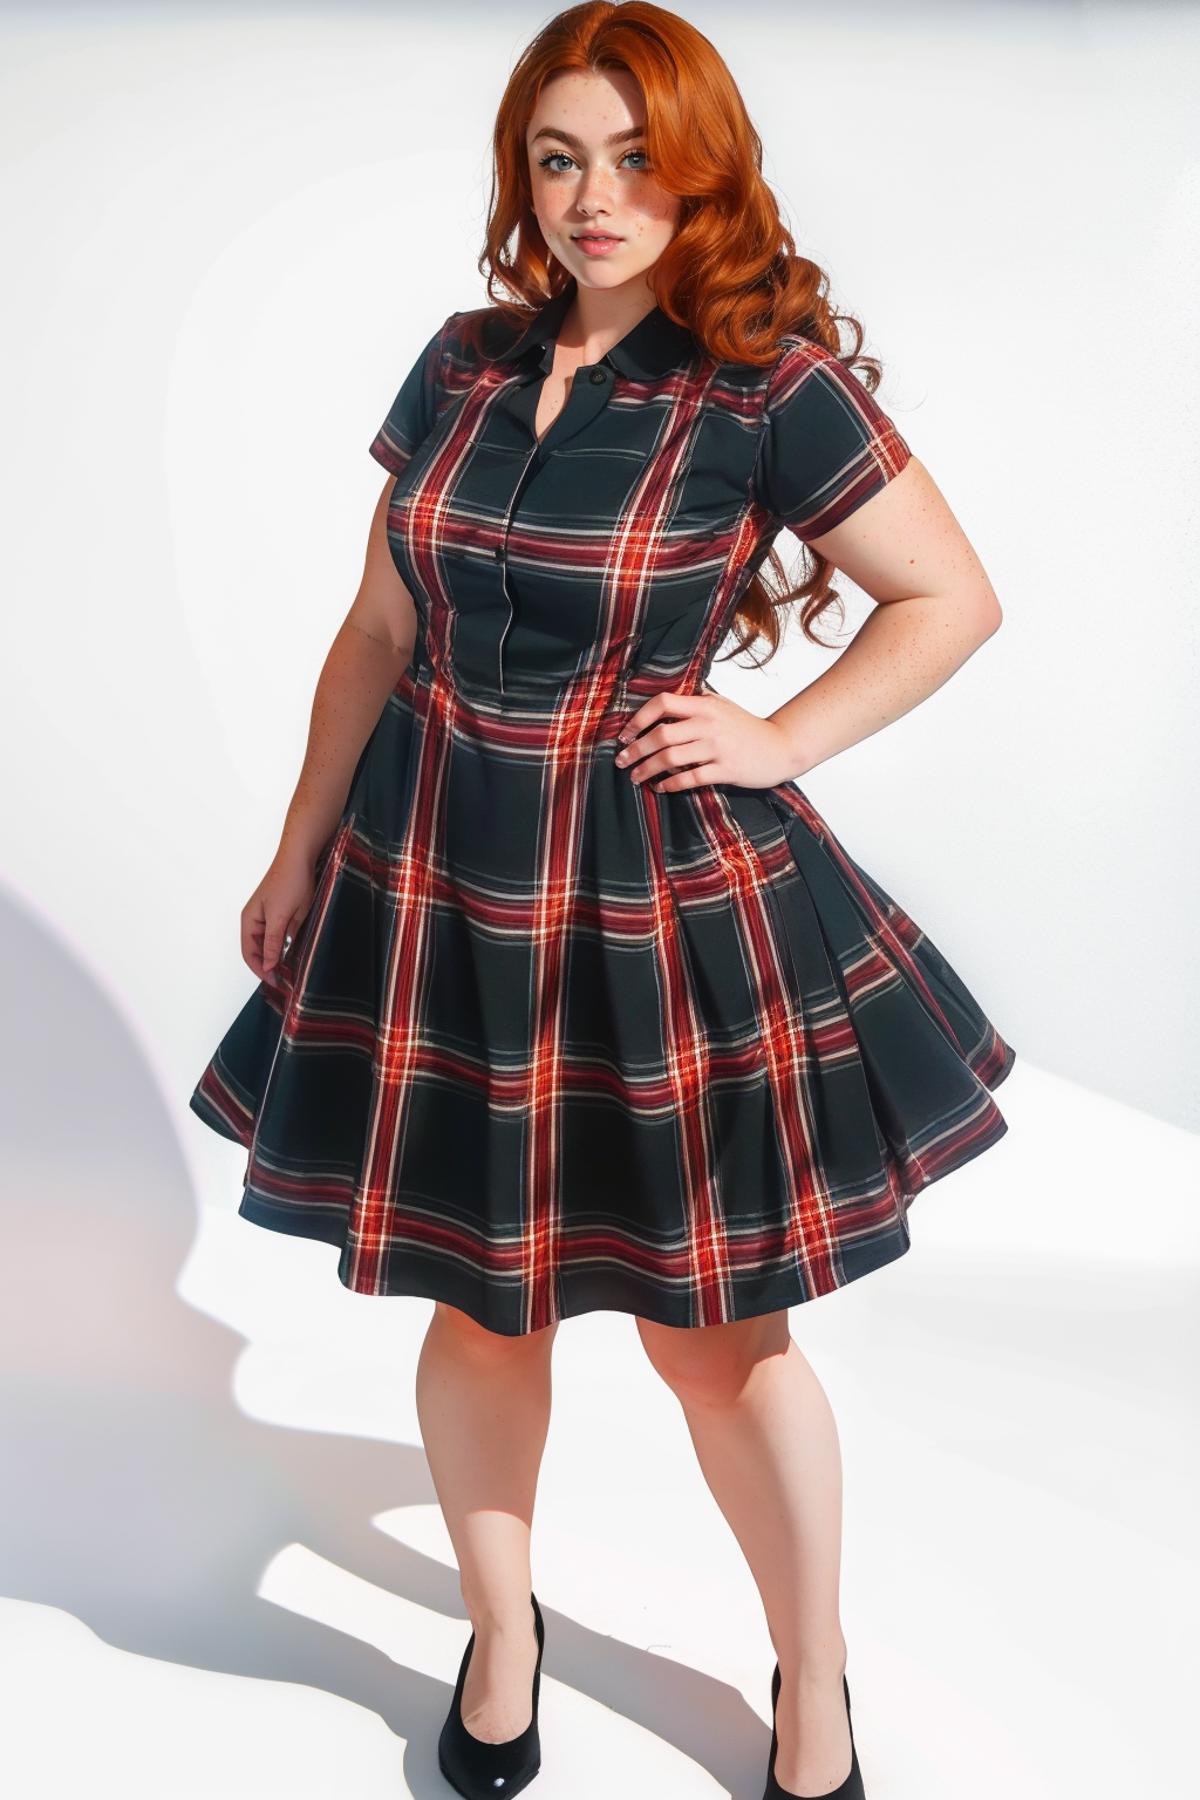 Short Collared Plaid Dress image by freckledvixon